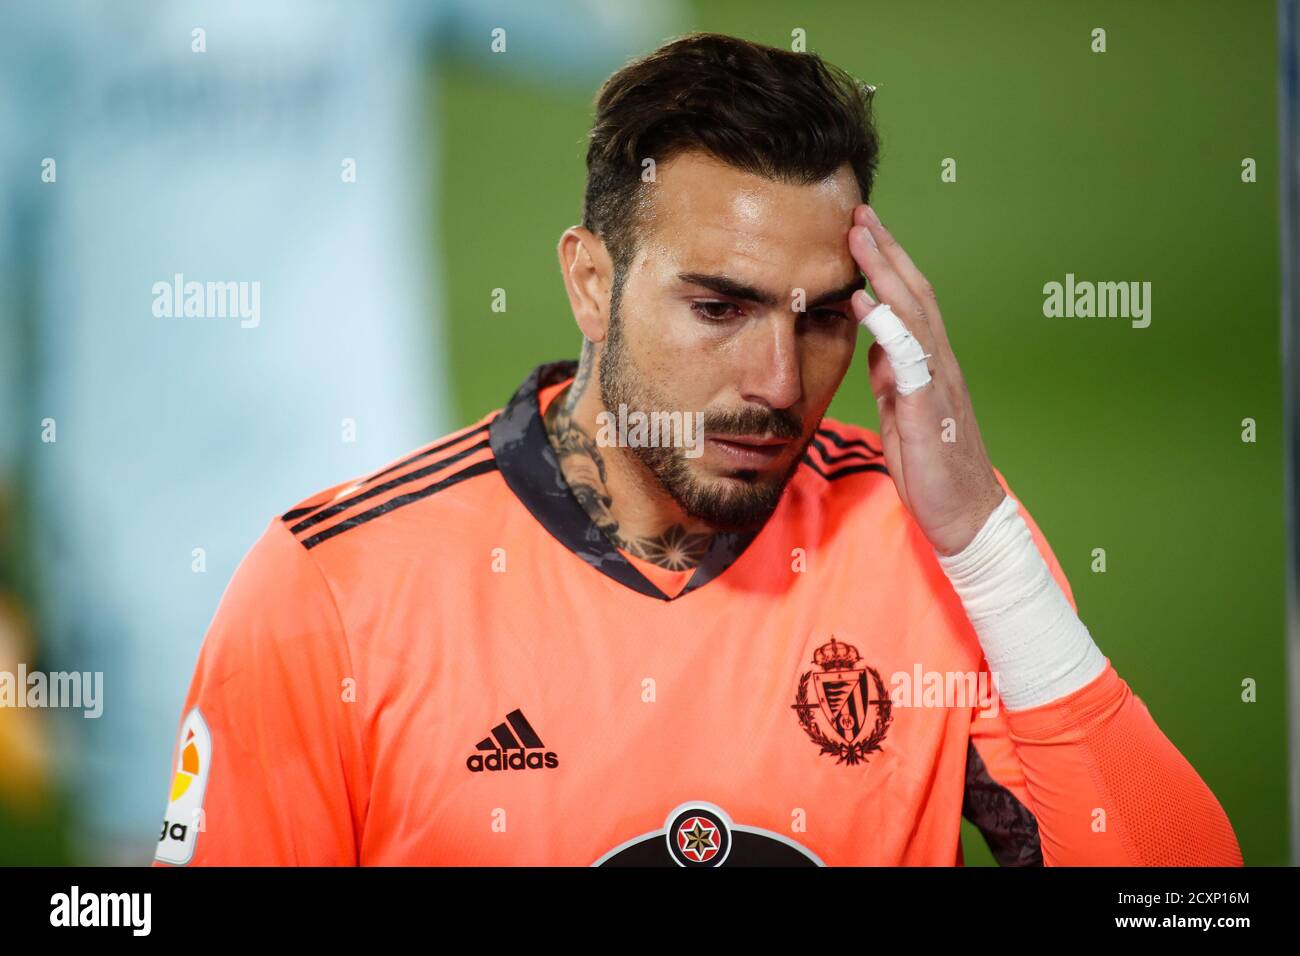 Roberto Jimenez Gago of Real Valladolid after the Spanish championship La Liga football match between Real Madrid and Real Valladolid on september 30, Stock Photo